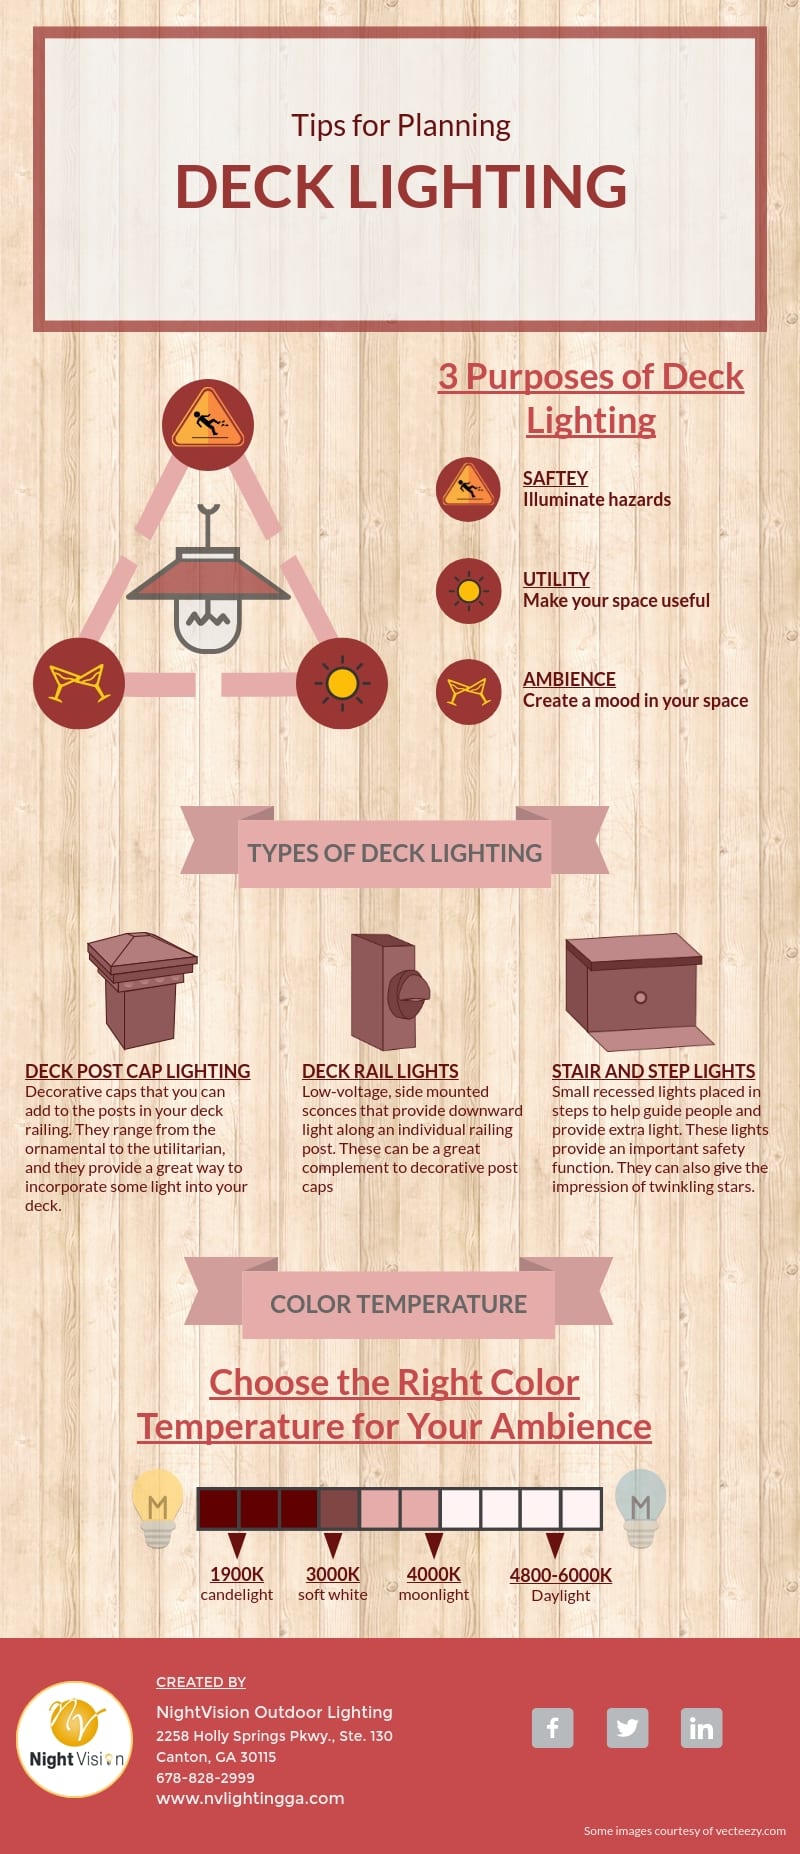 Tips for Planning Deck Lighting [infographic]